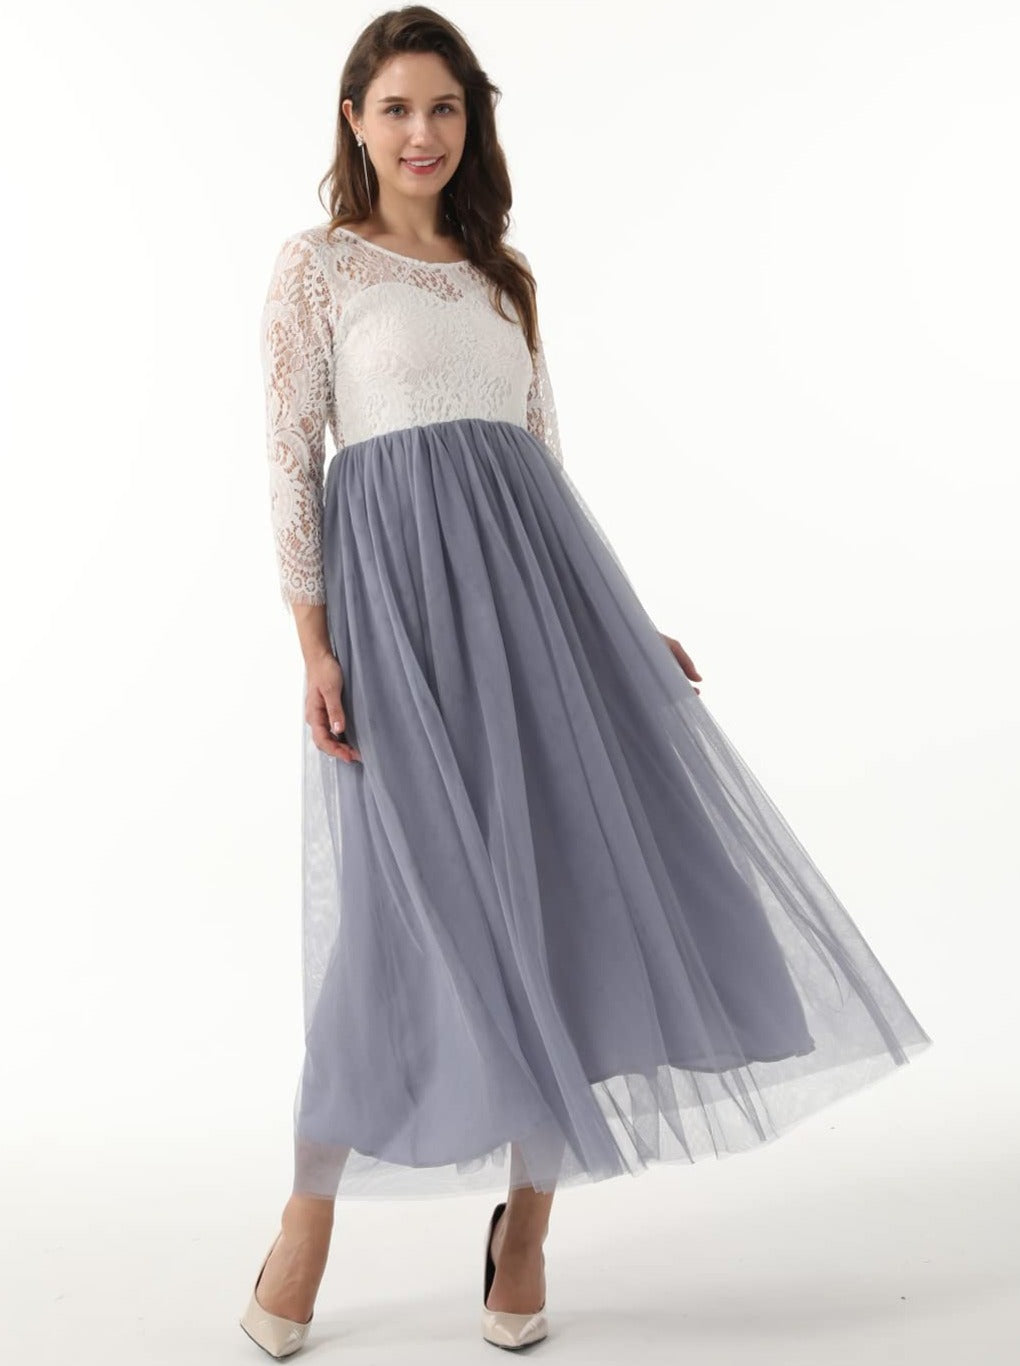 Peony Lace Dress for Women in Bluish Gray